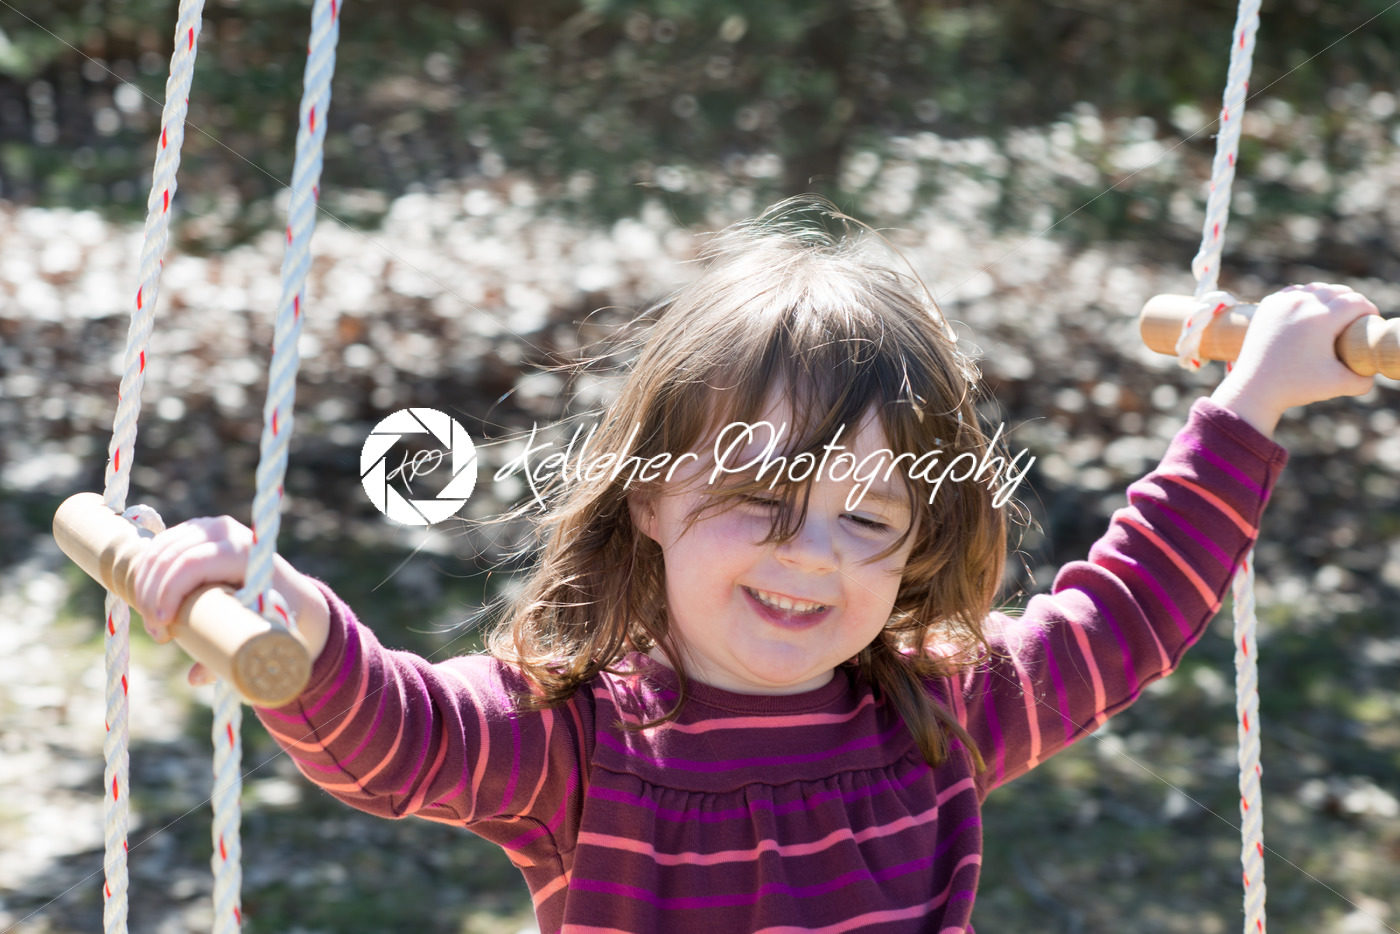 Young girl outside in backyard having fun on a swing - Kelleher Photography Store